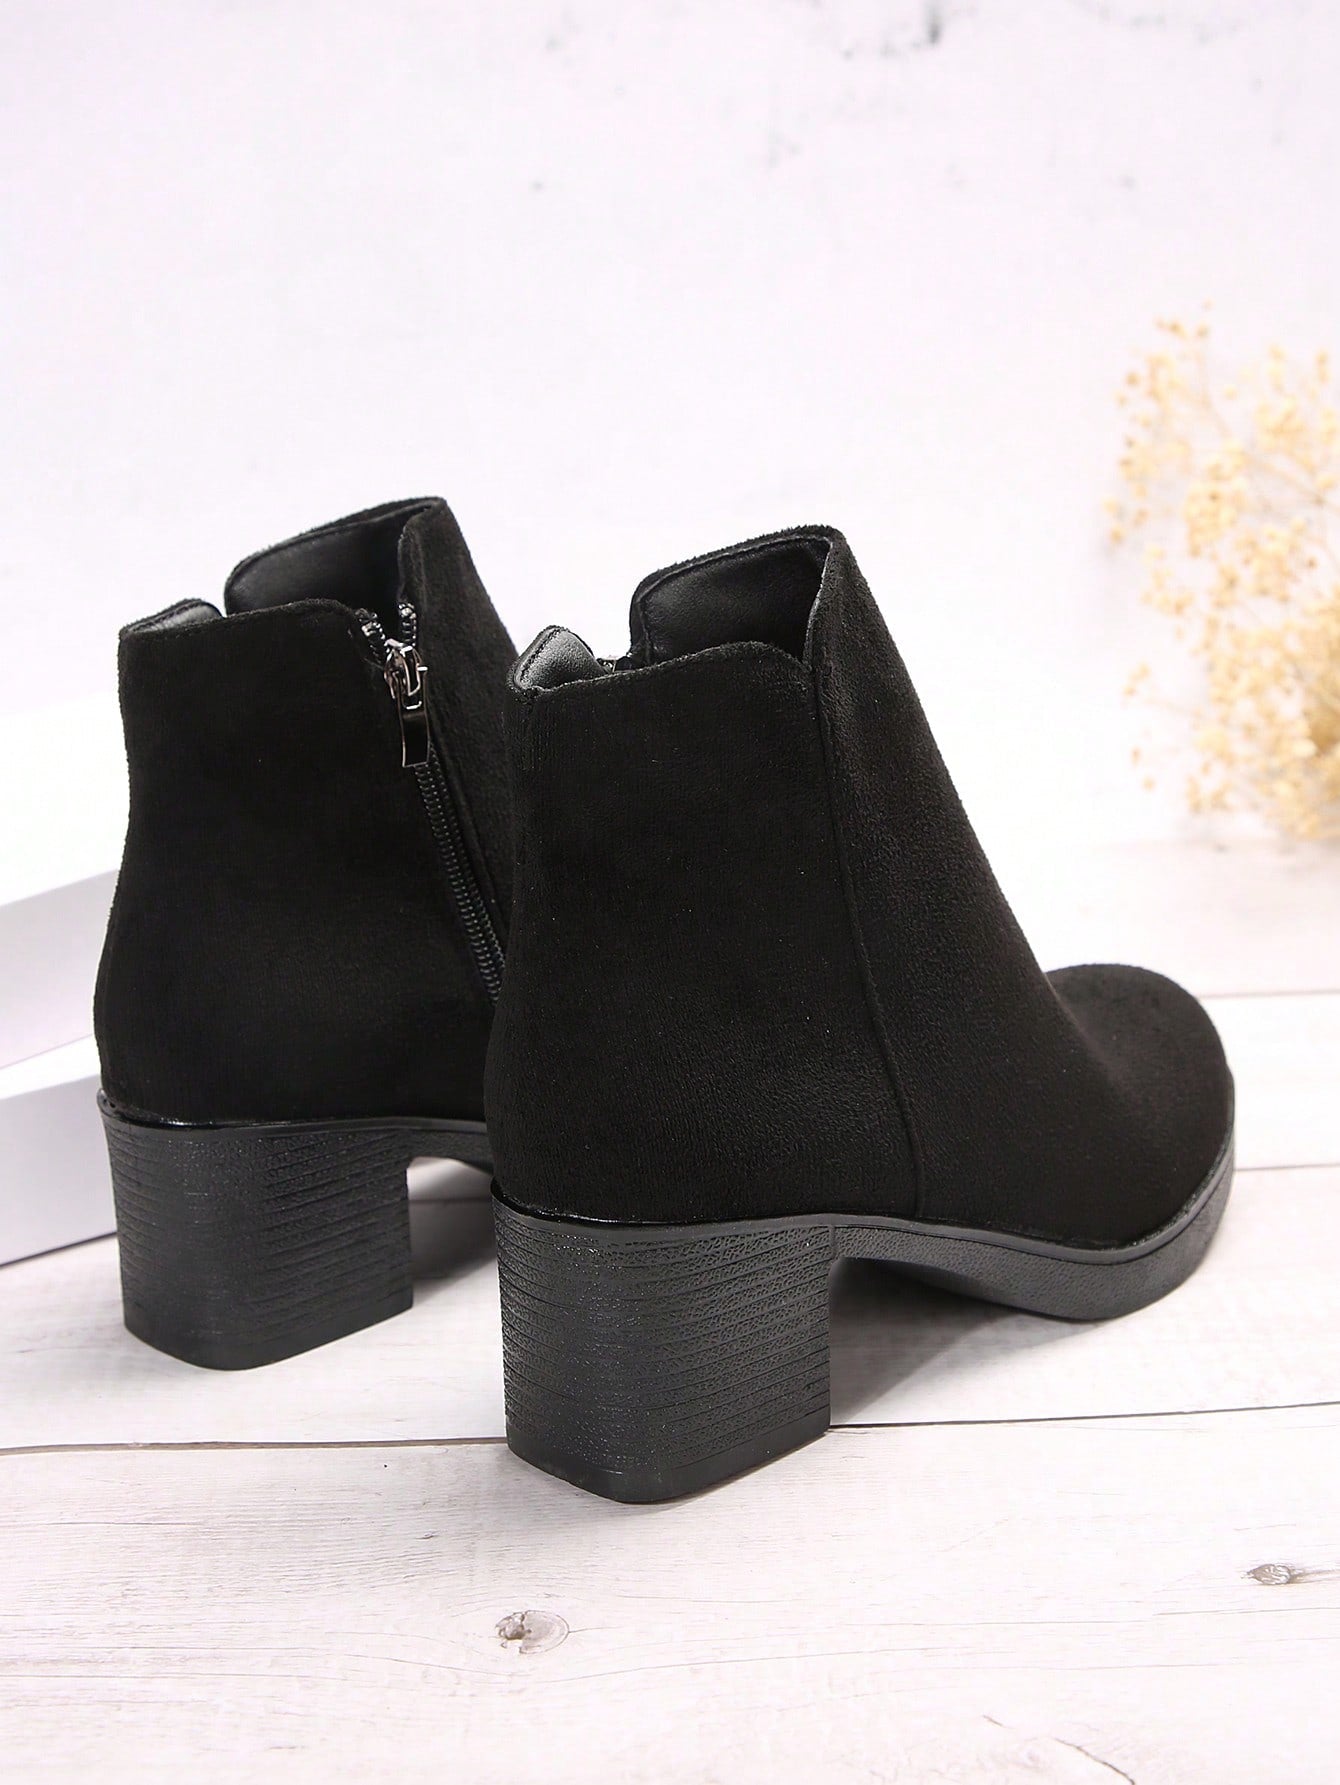 Women's Fashion Chunky Heel Short Boots, Comfortable Round Toe, Plus Velvet Warm High Heeled Shoes, Casual Versatile, Non-Slip And Bare Boots